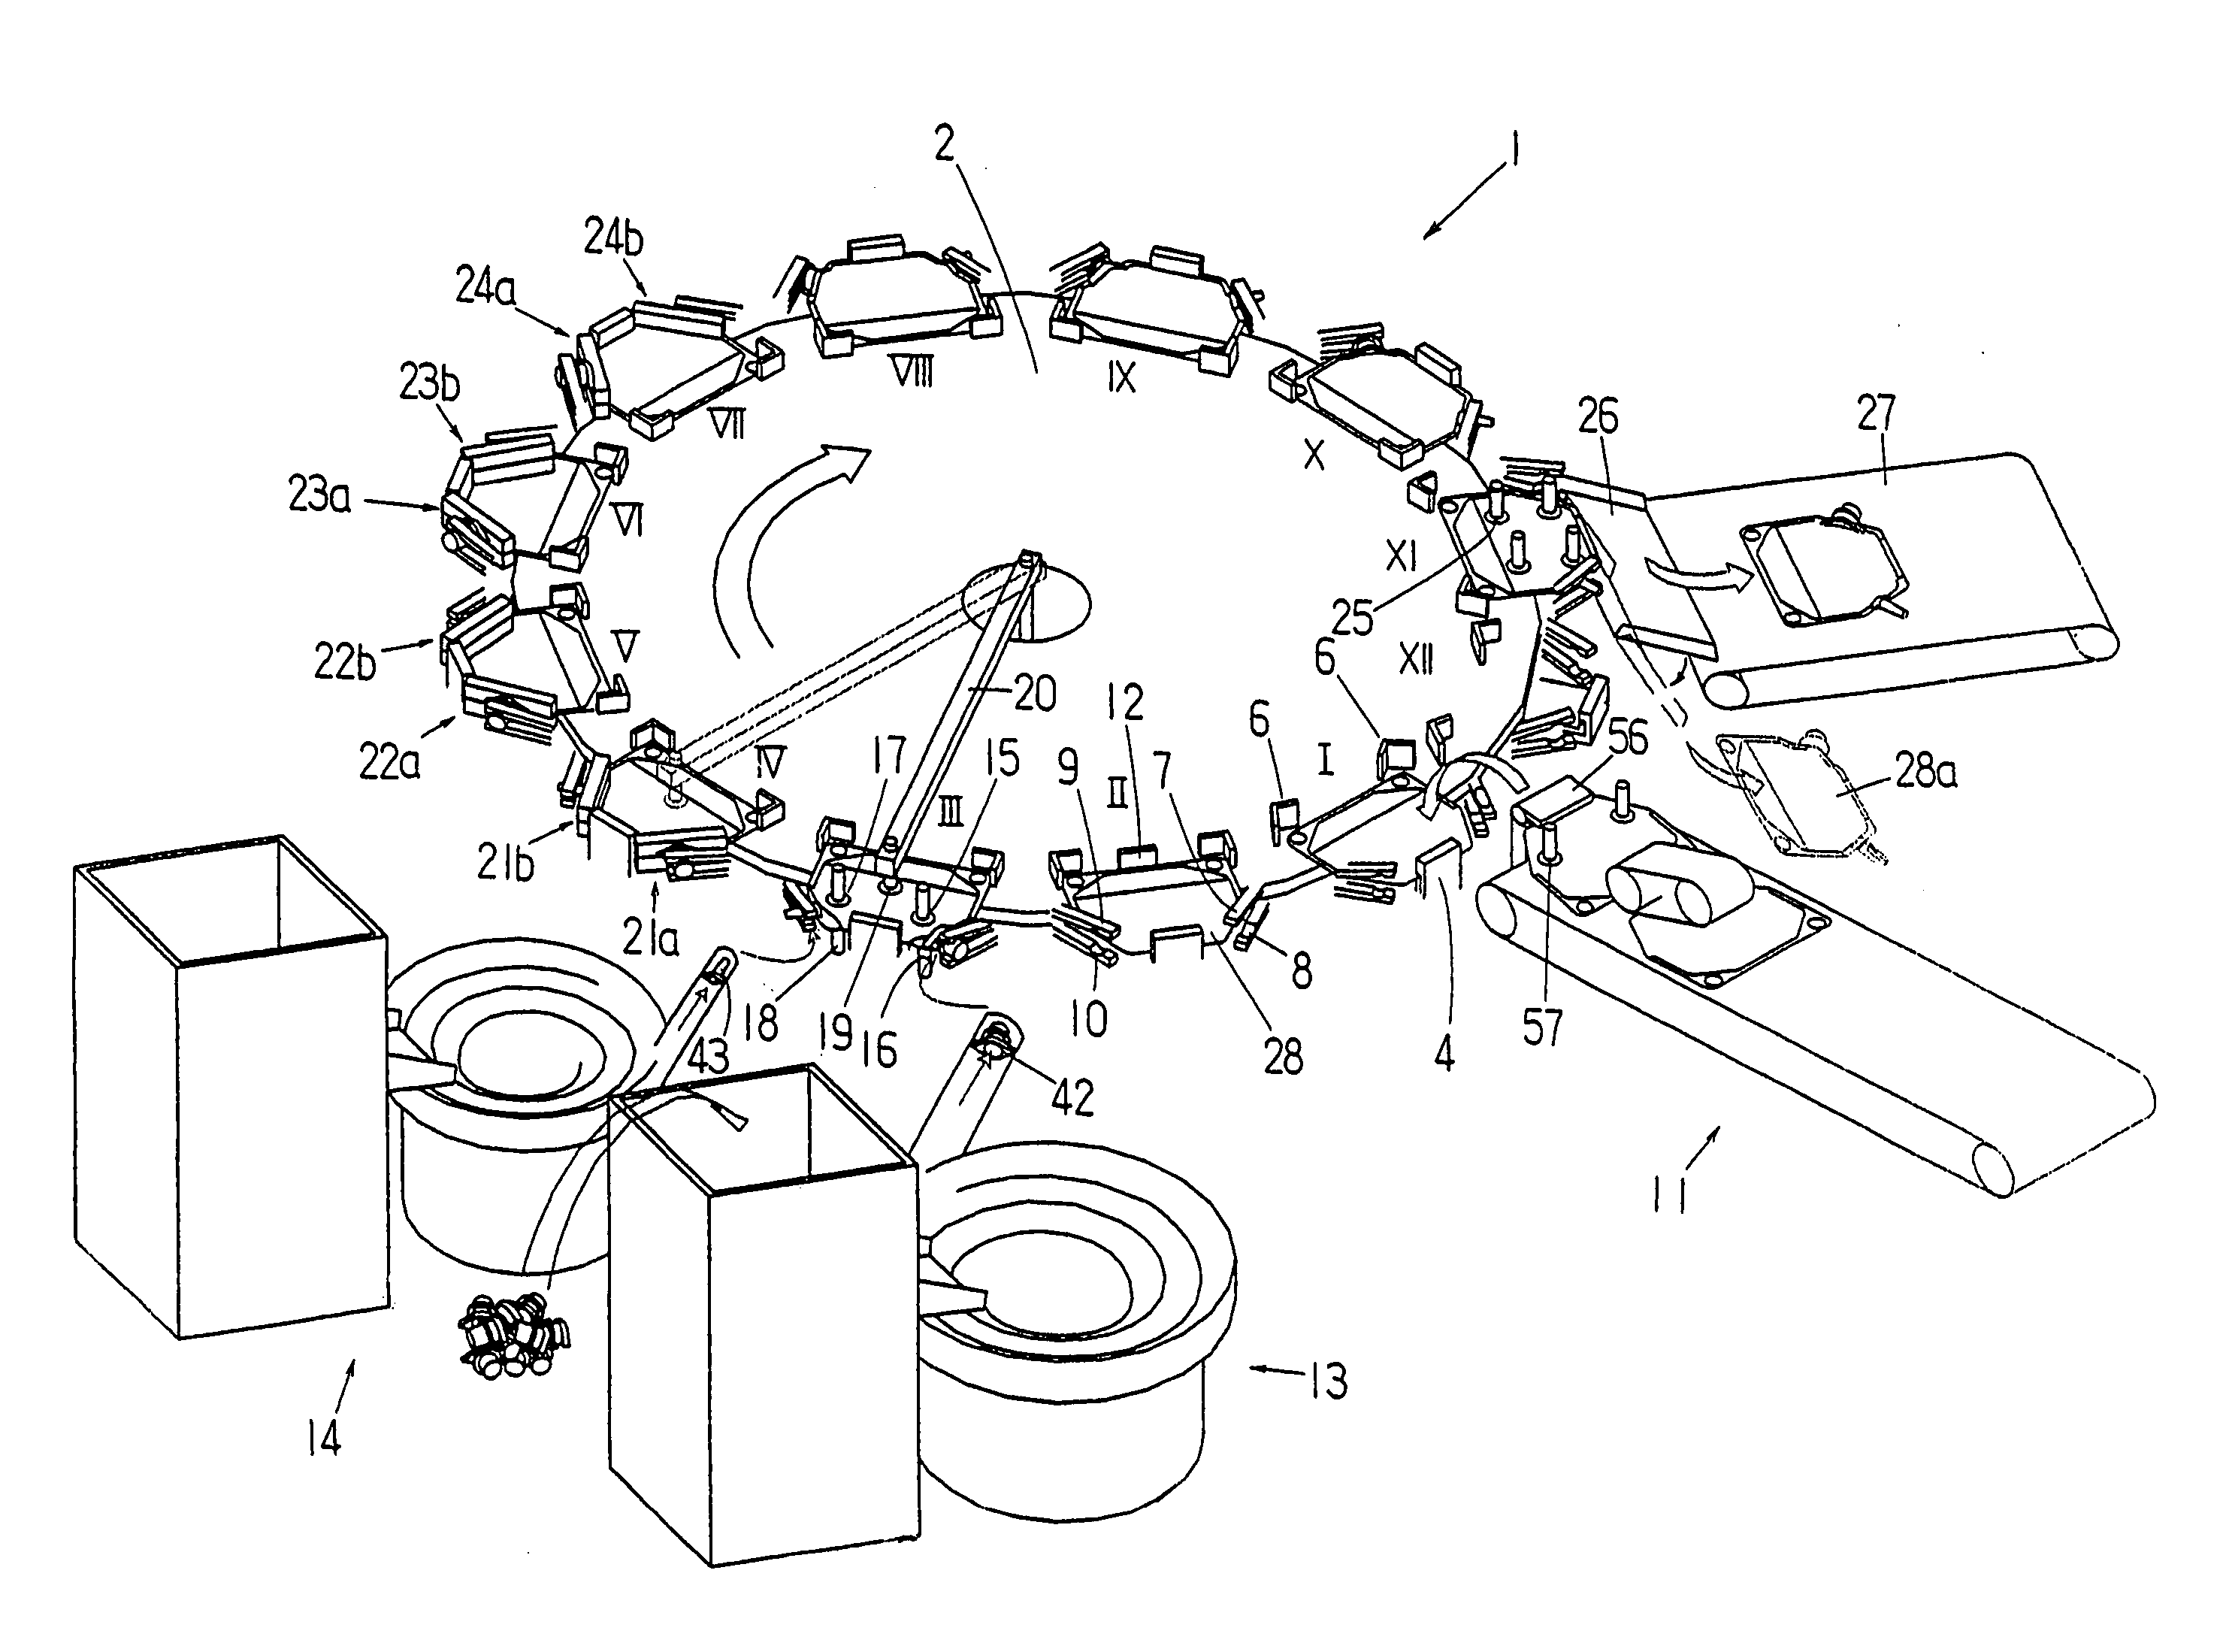 Method and apparatus for manufacturing a bag equipped with spouts